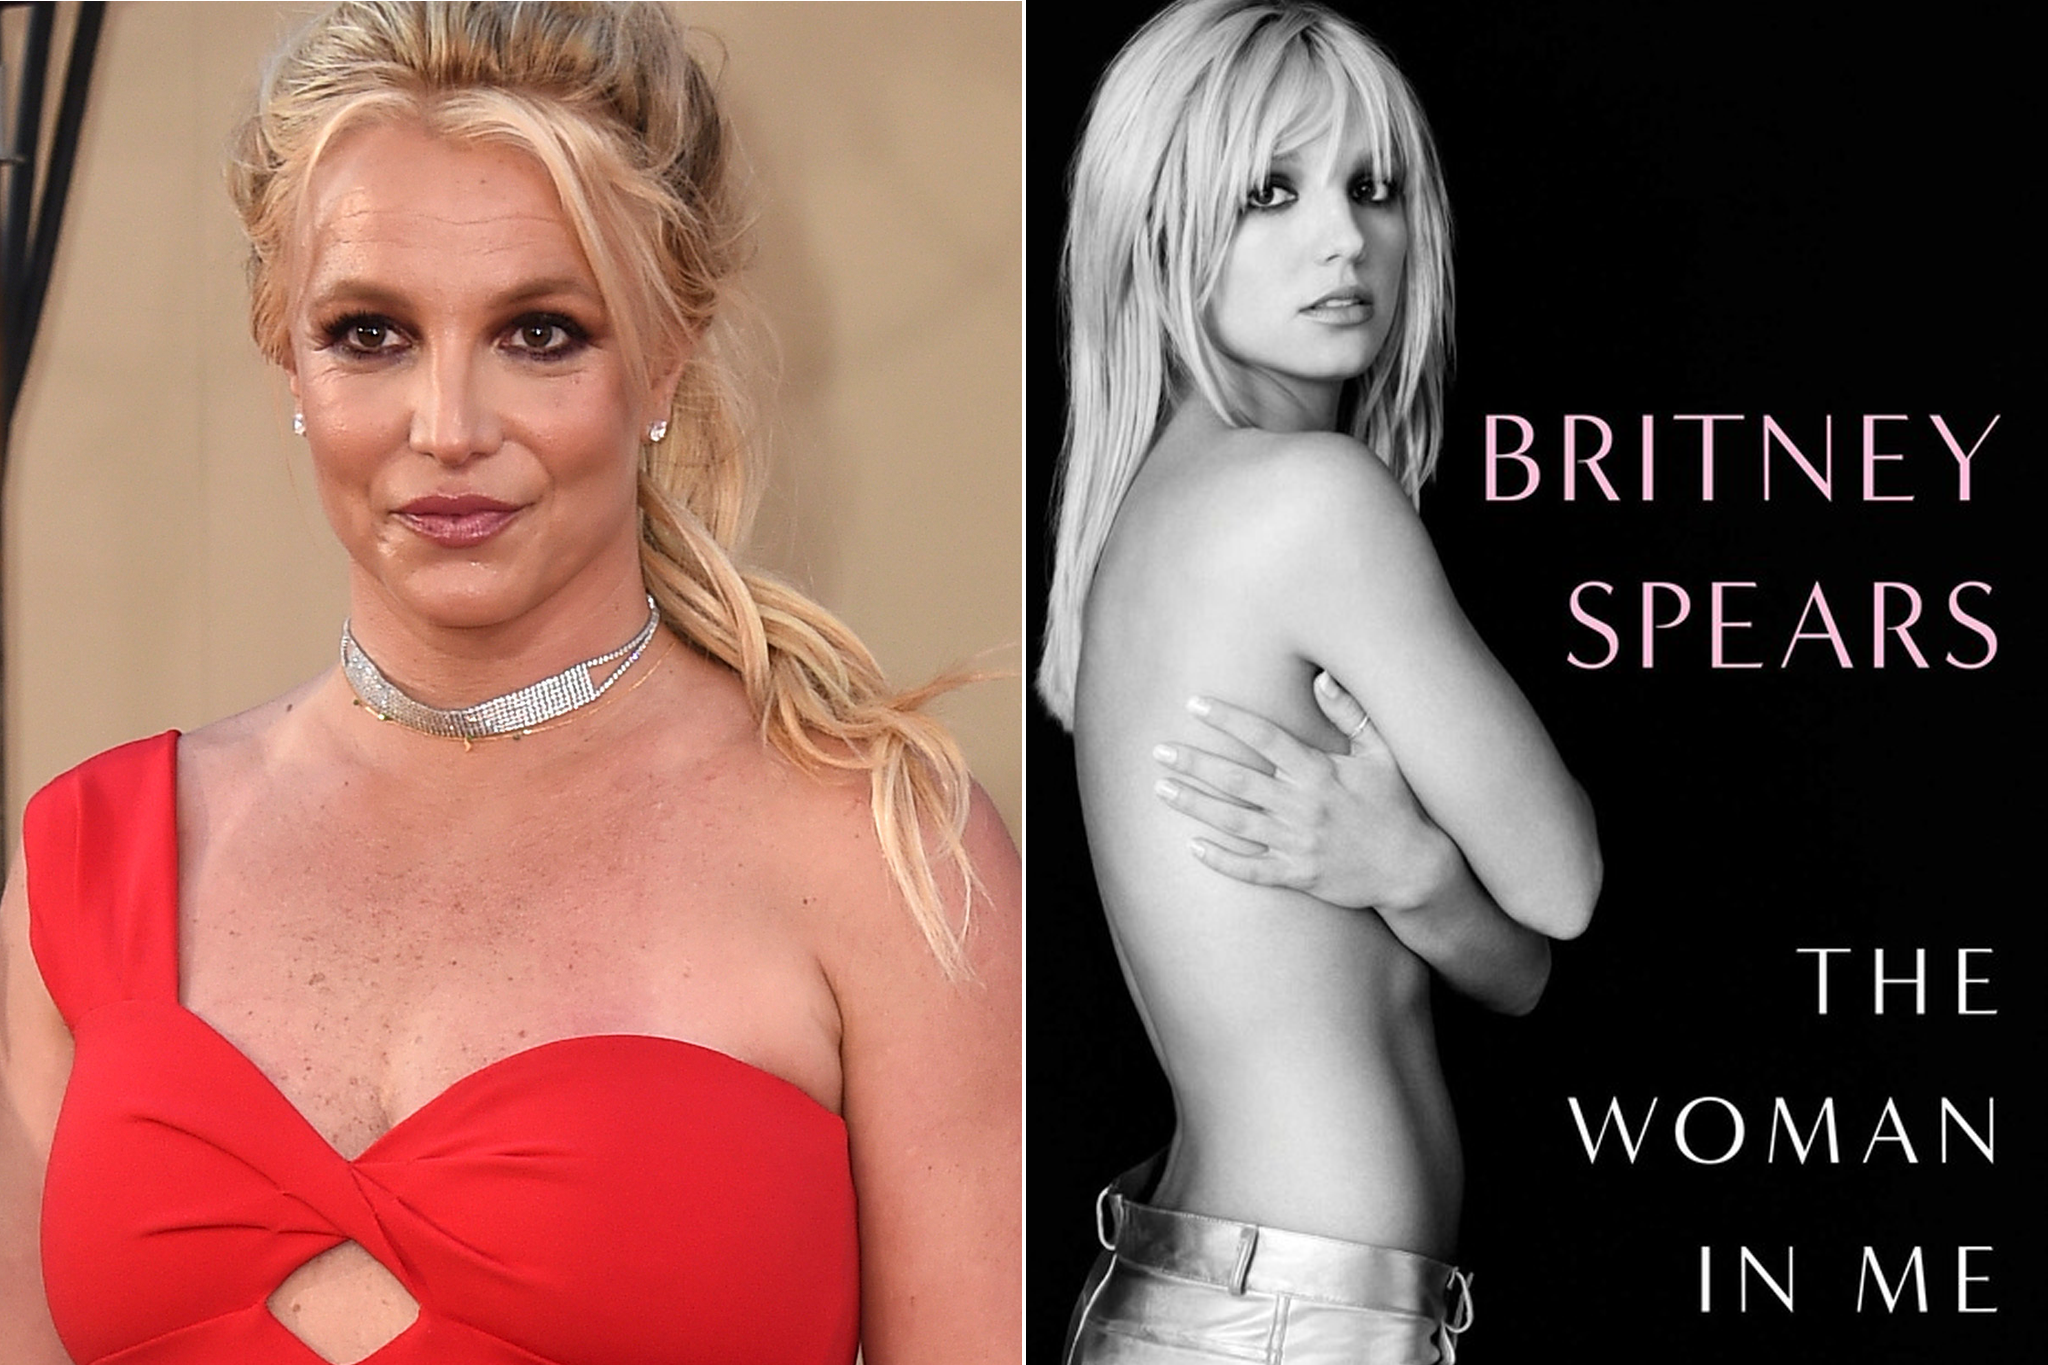 Britney Spears’ memoir, The Woman in Me, details her rise to global fame – and how she struggled to cope with it